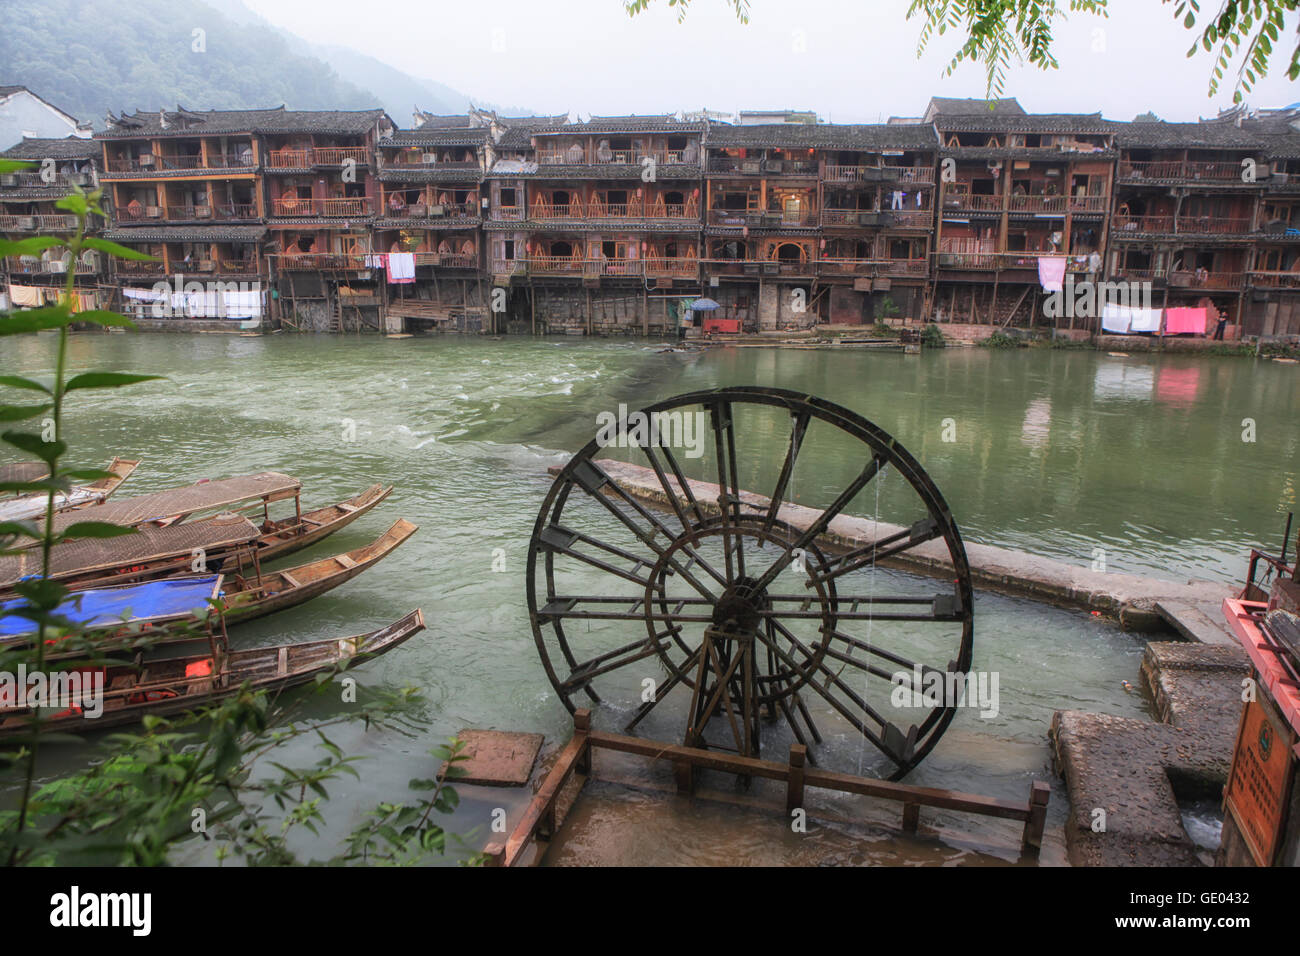 Boats and Watermills Old Phoenix Town Fenghuang, China Stock Photo